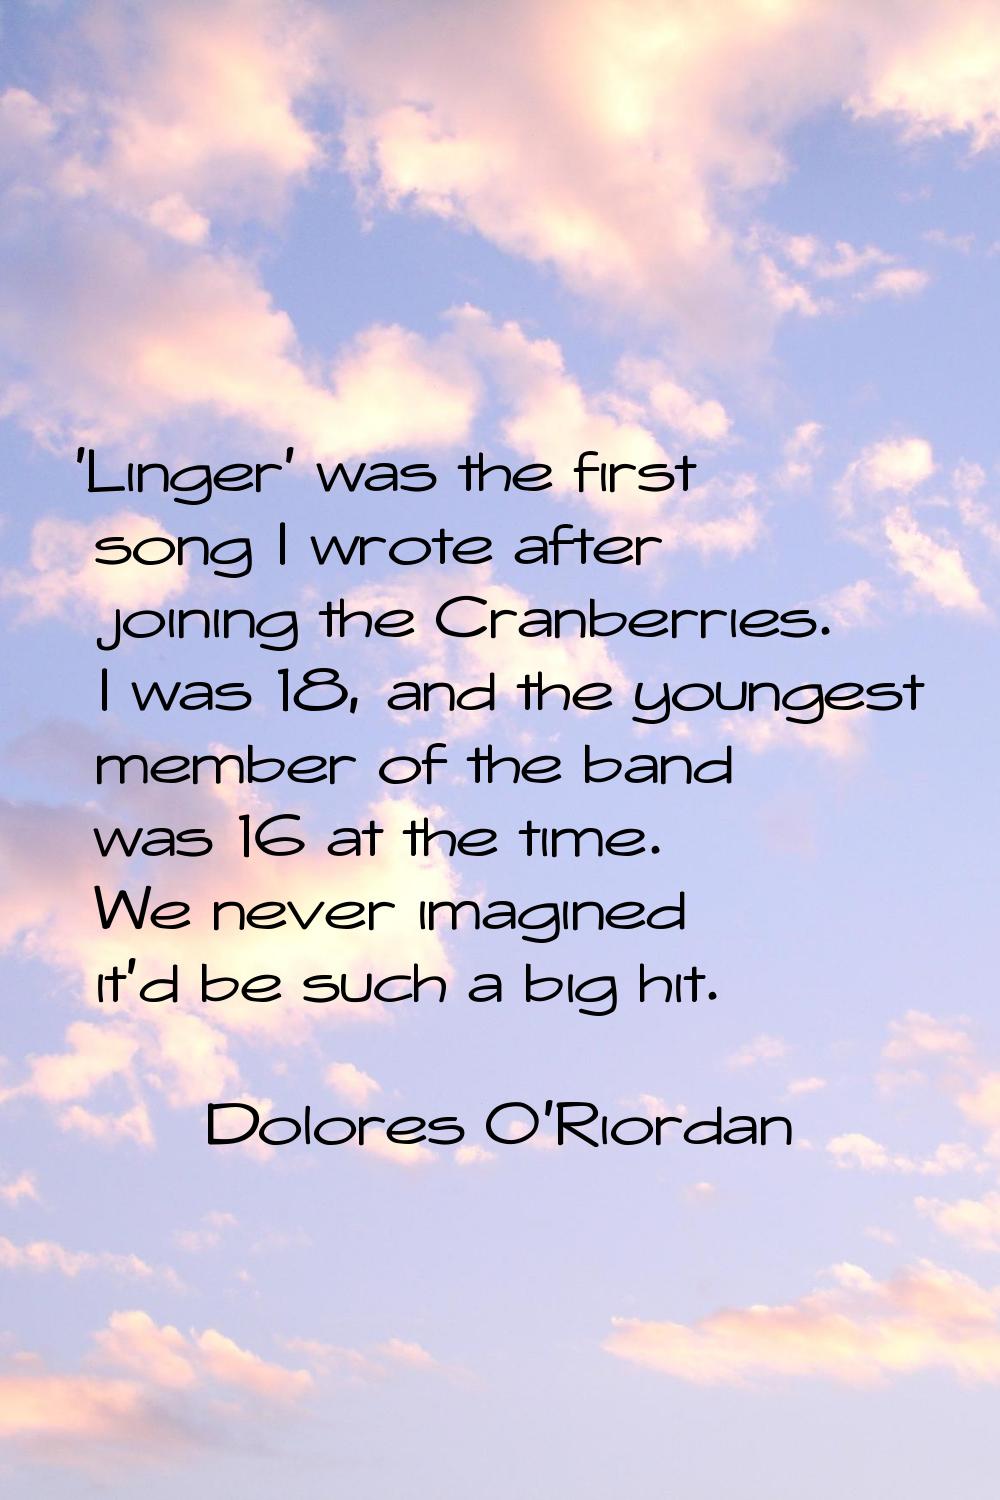 'Linger' was the first song I wrote after joining the Cranberries. I was 18, and the youngest membe